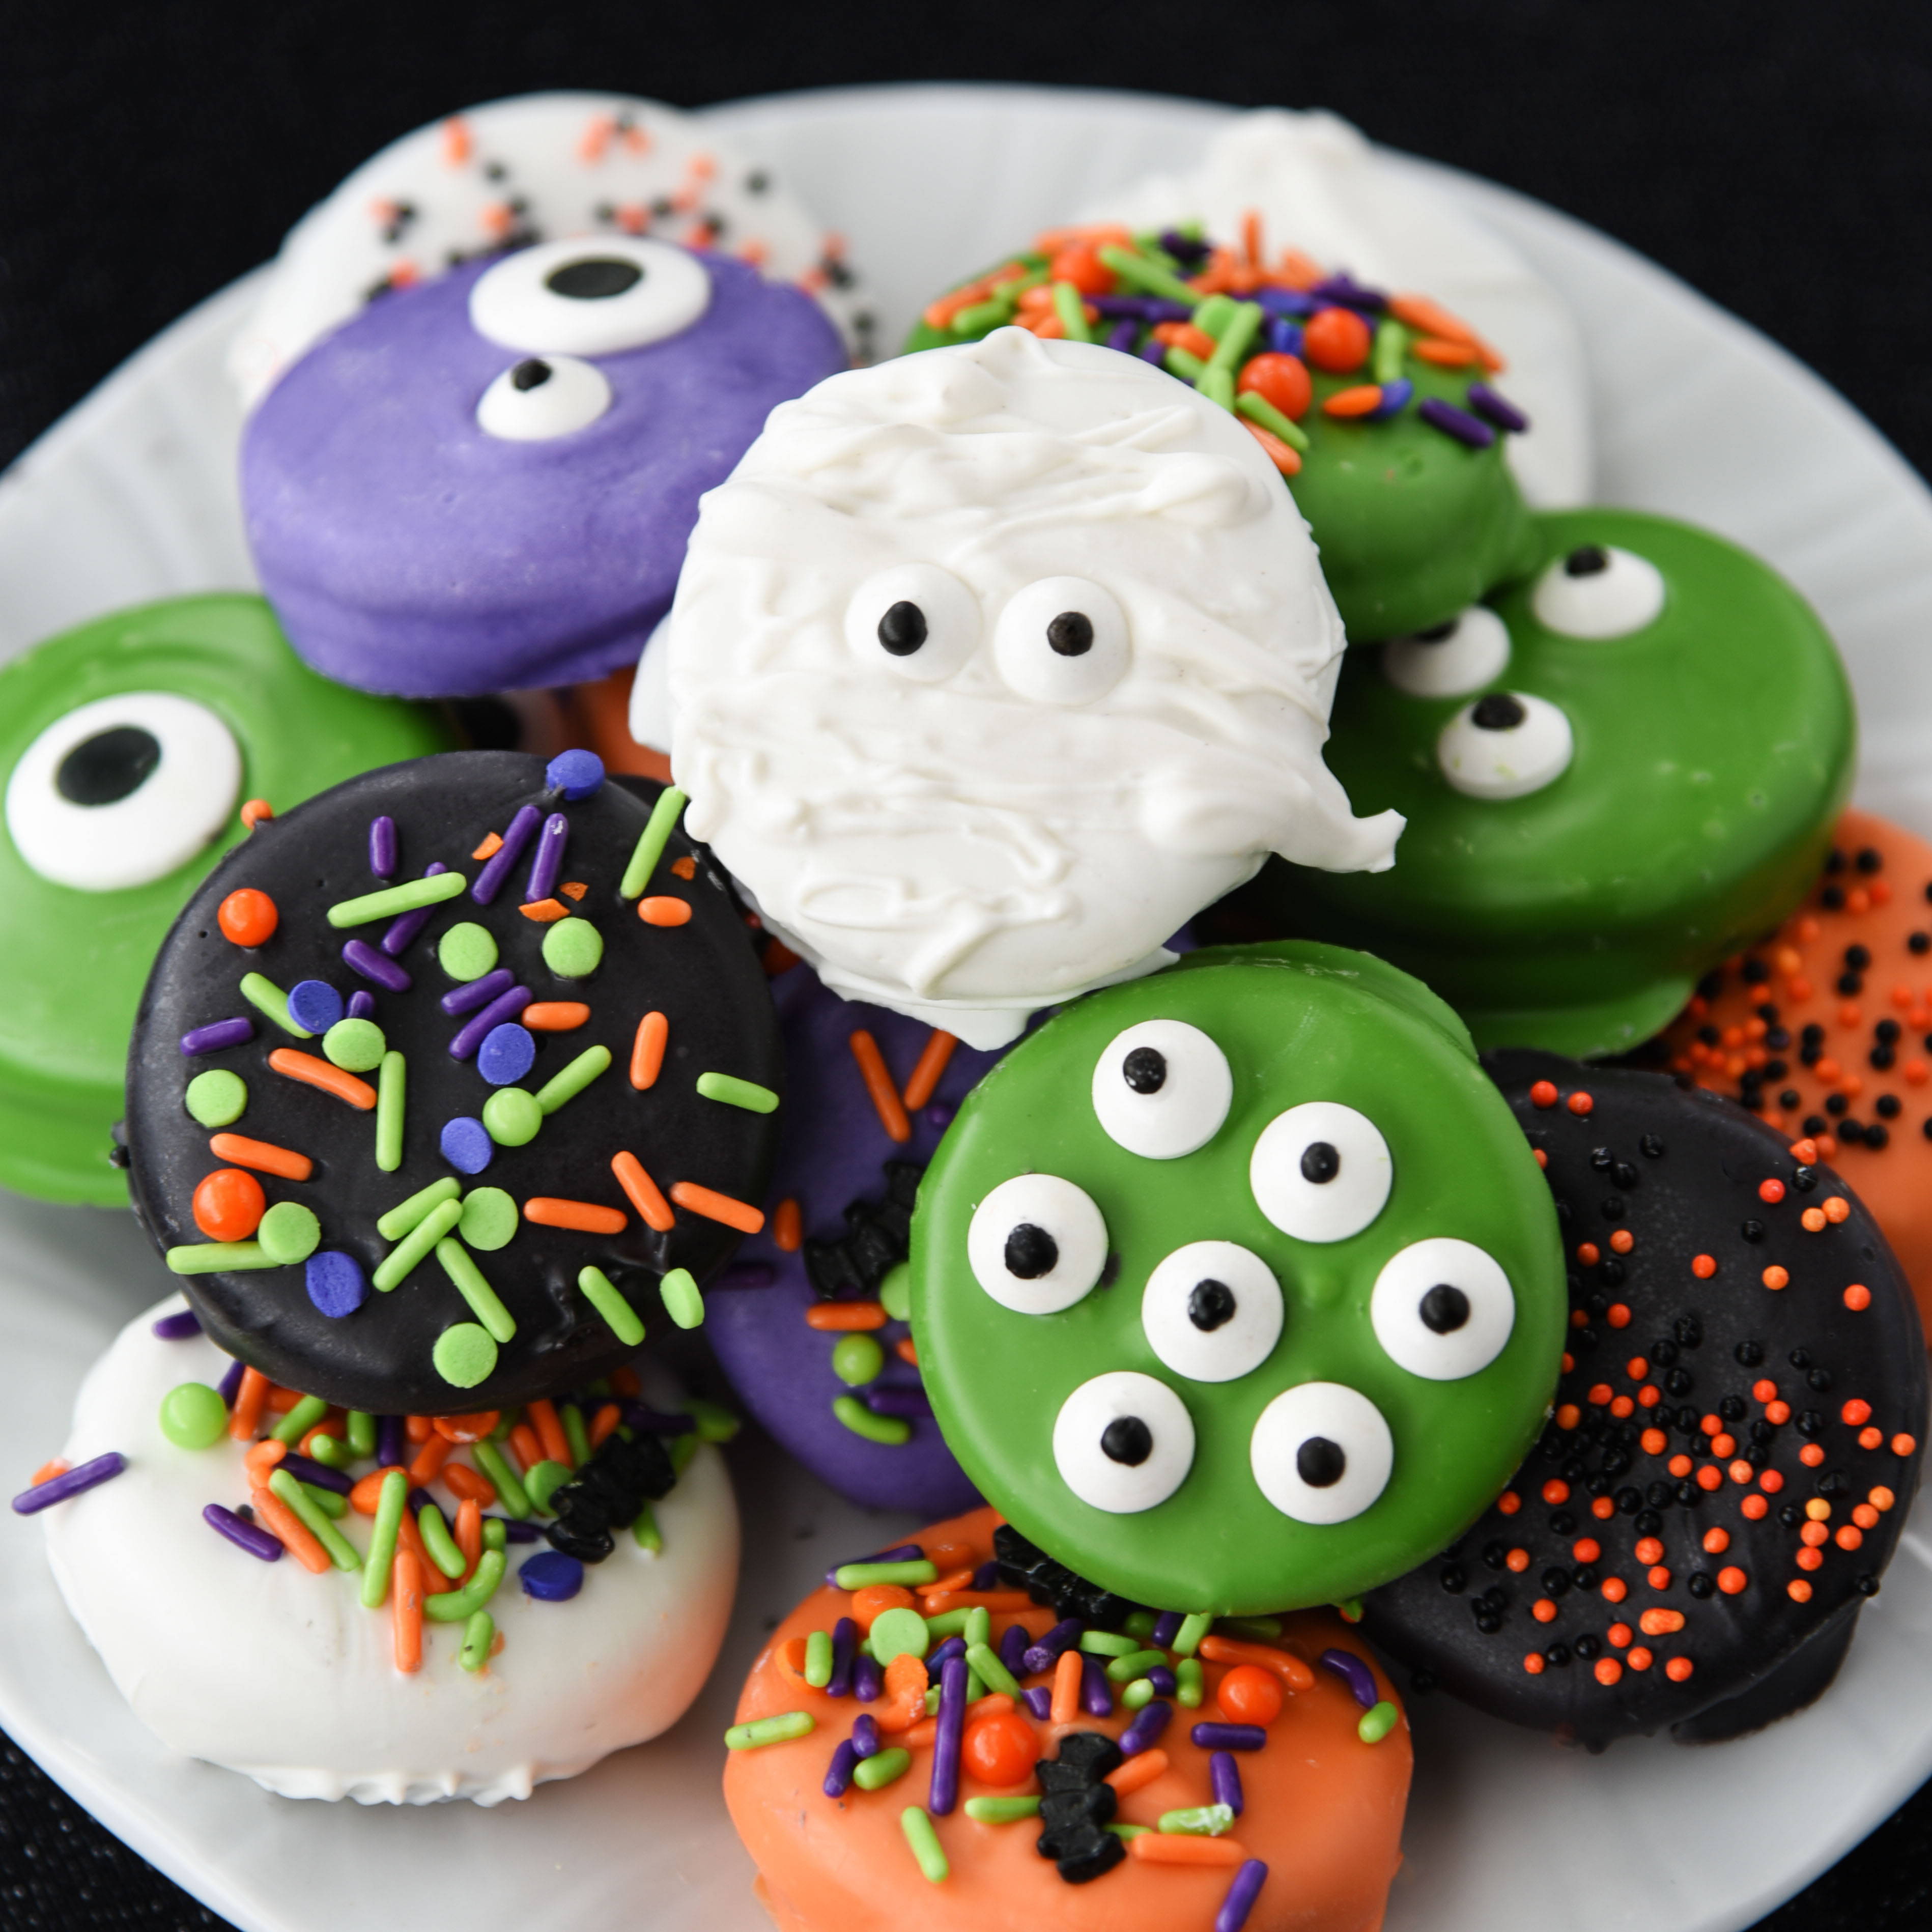 Halloween Dipped Oreos are just about as fun as you can get when it comes to cute and creepy treats! The bright colors are so fun and festive.